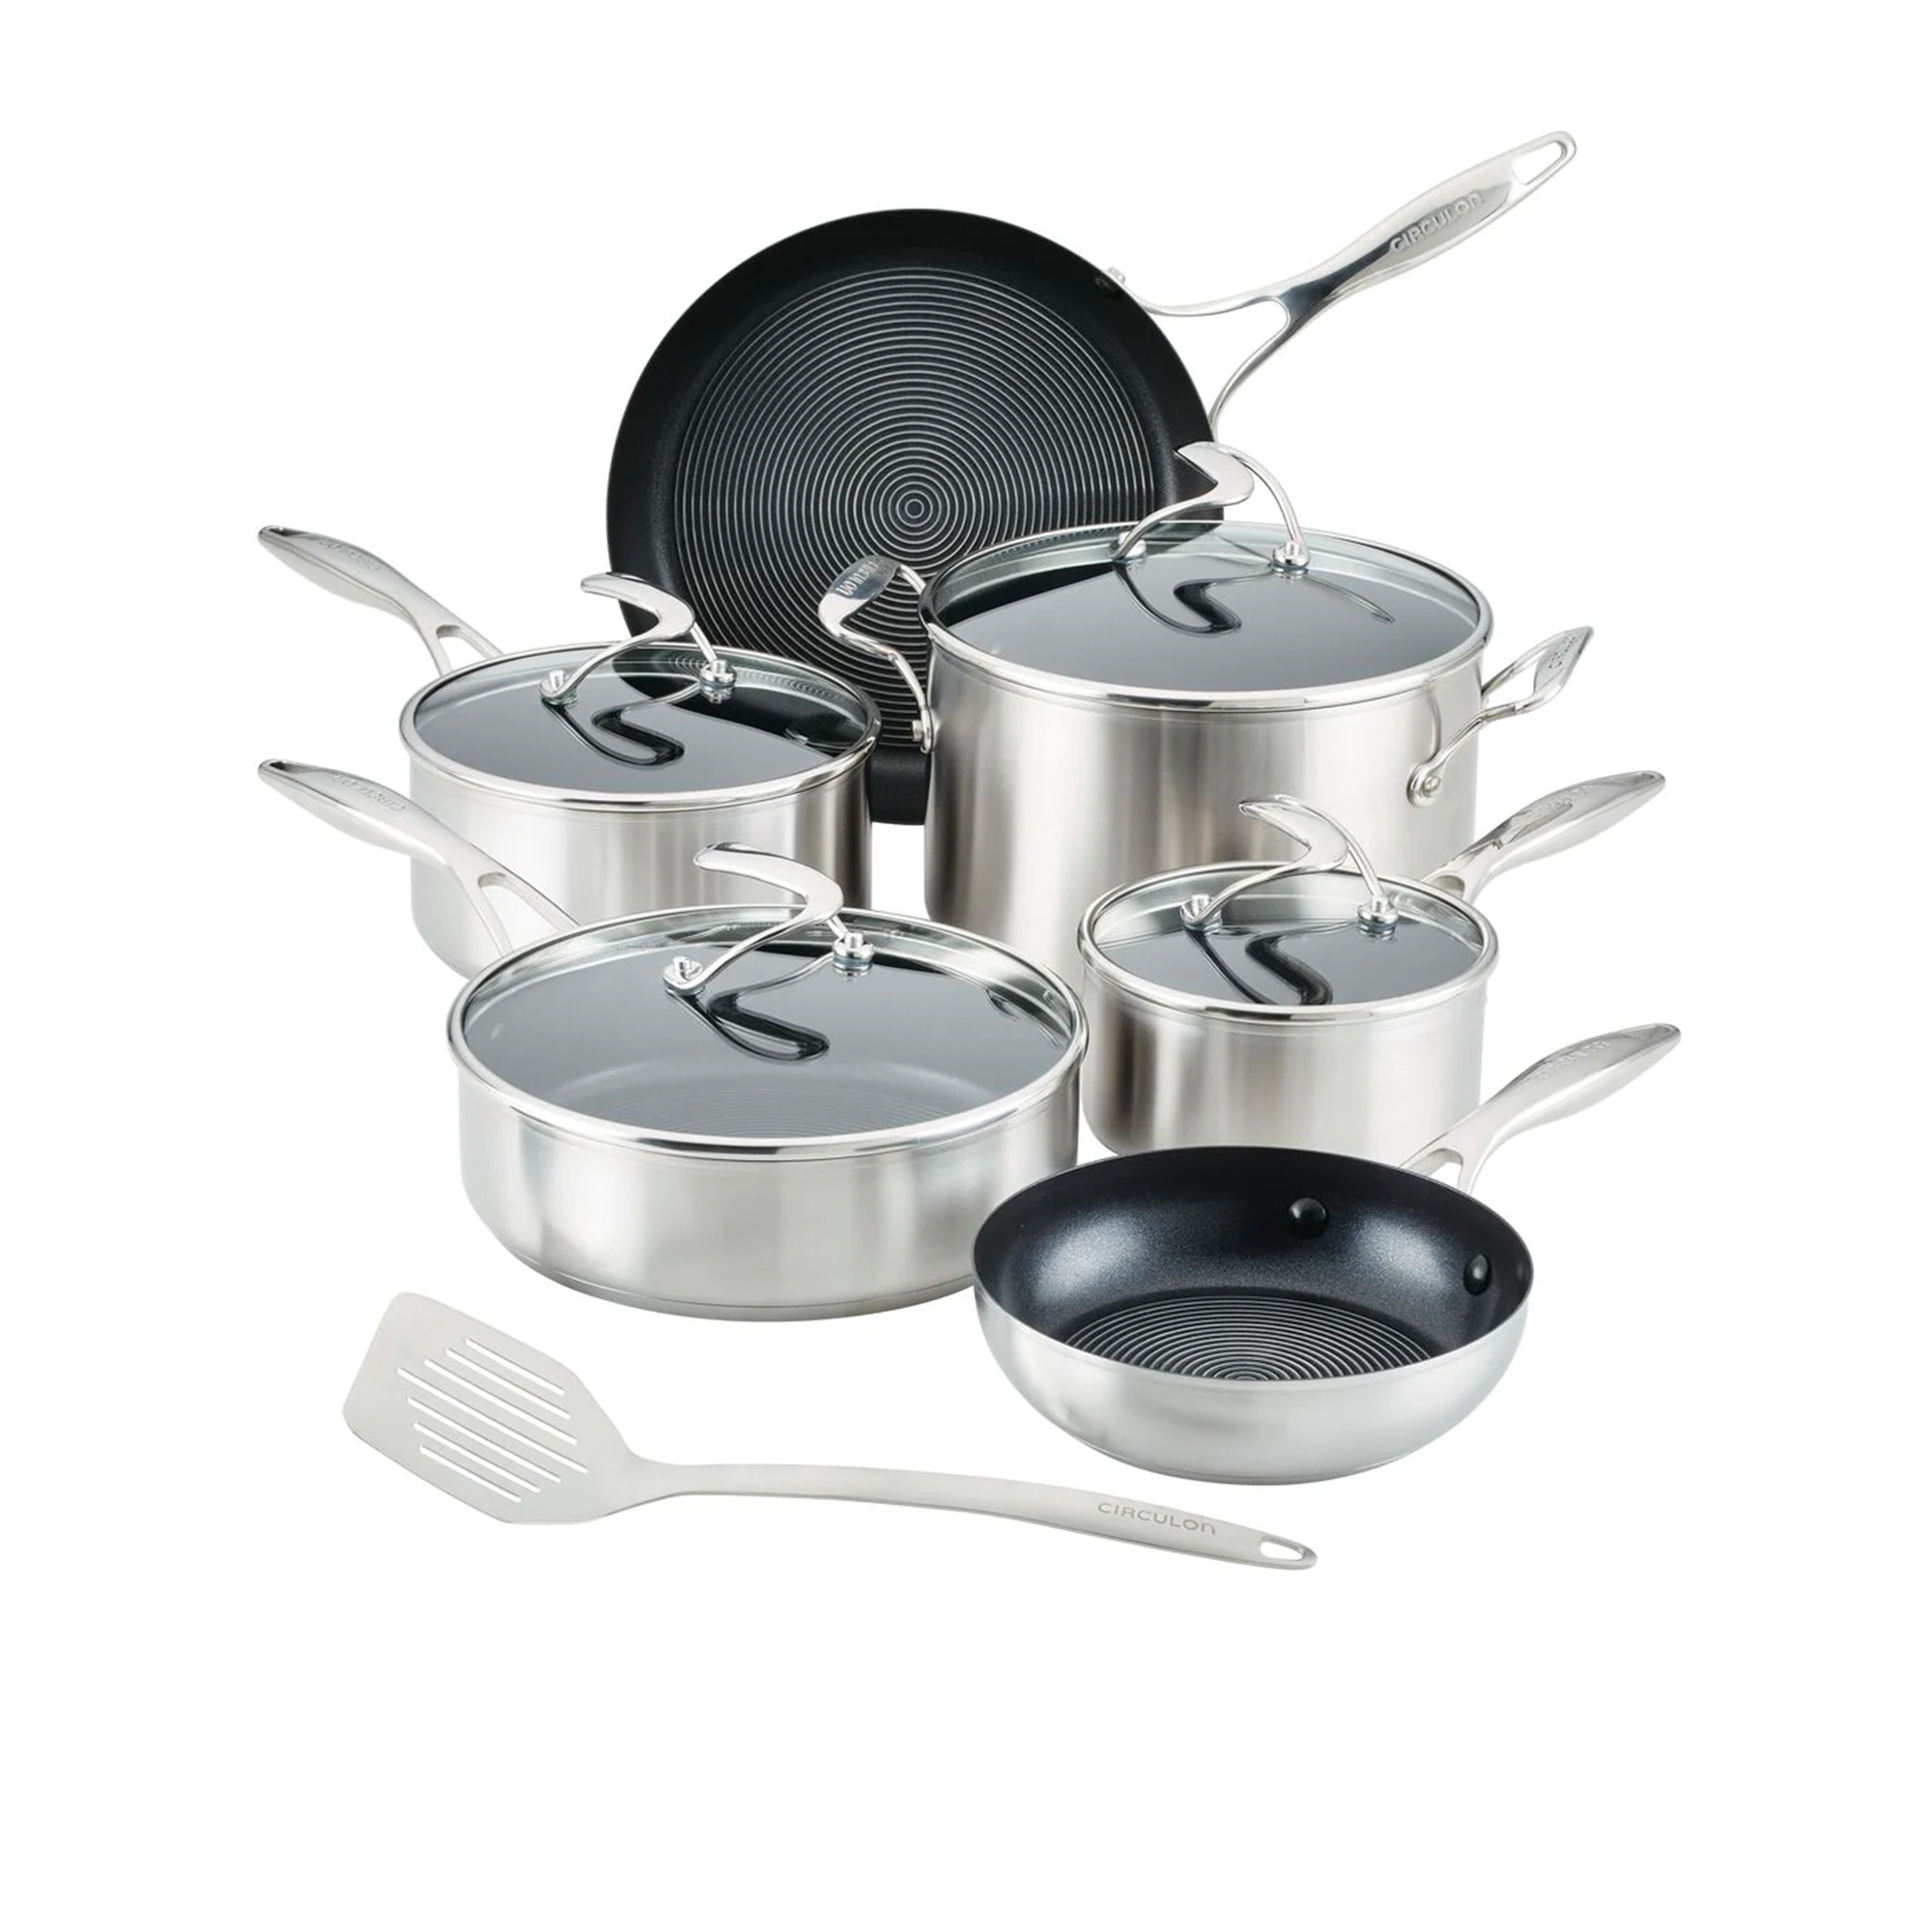 Circulon Steelshield S Series 10pc Stainless Steel Cookware Set Image 1